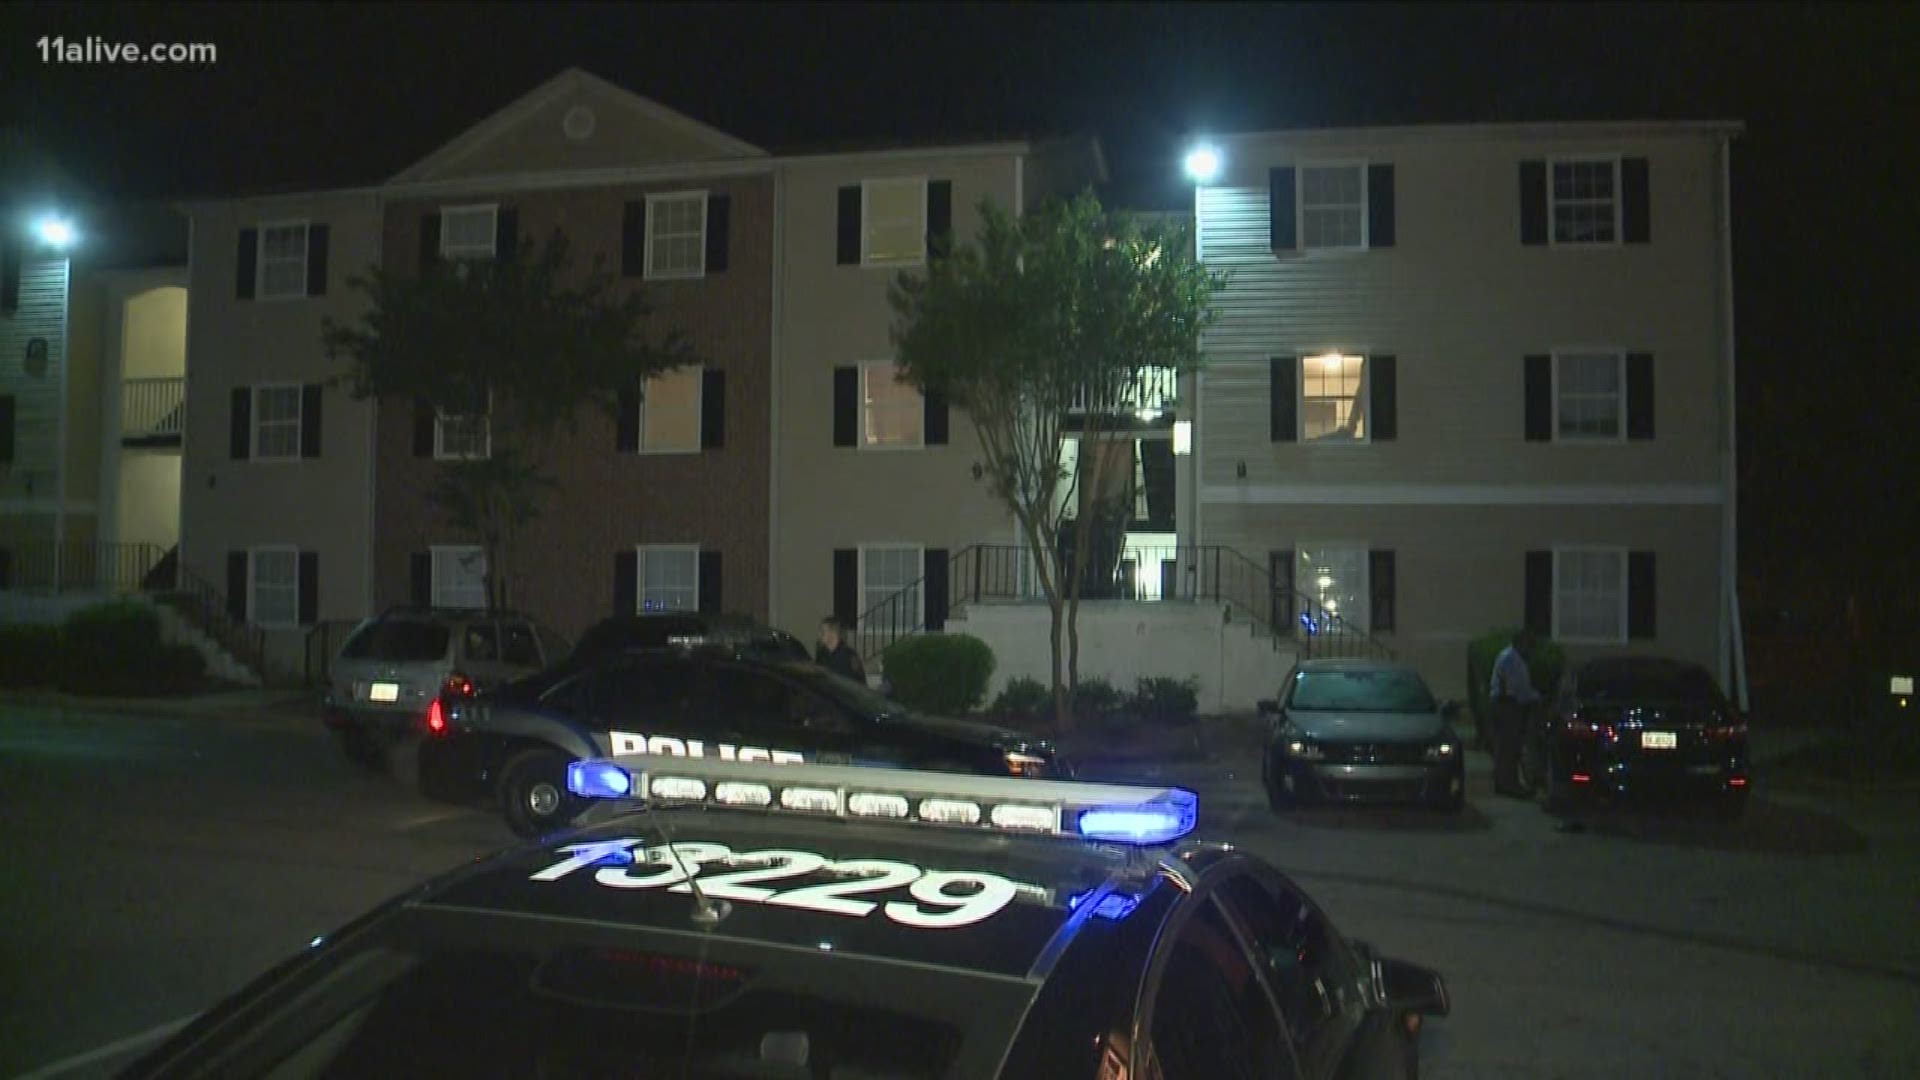 A man escaped after shooting at a DeKalb County Police Officer overnight at the Wesley Club Apartments, the department said.